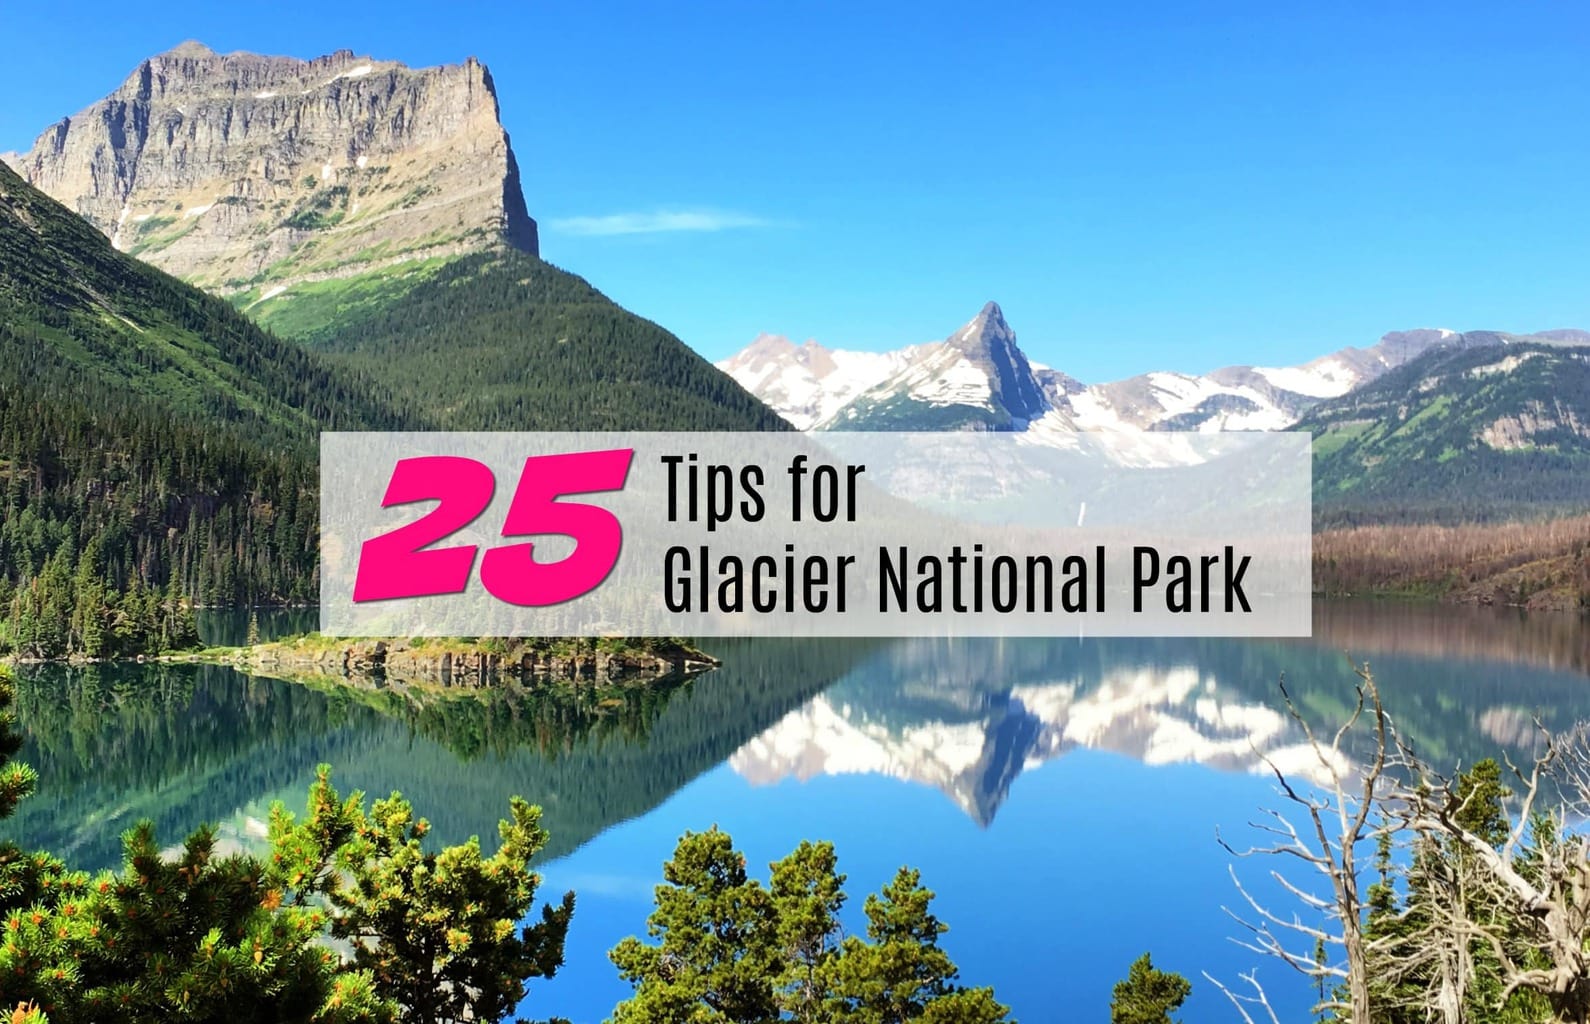 25 Travel Tips for Glacier National Park You Need to Know in 2023 -  Wanderful World of Travel